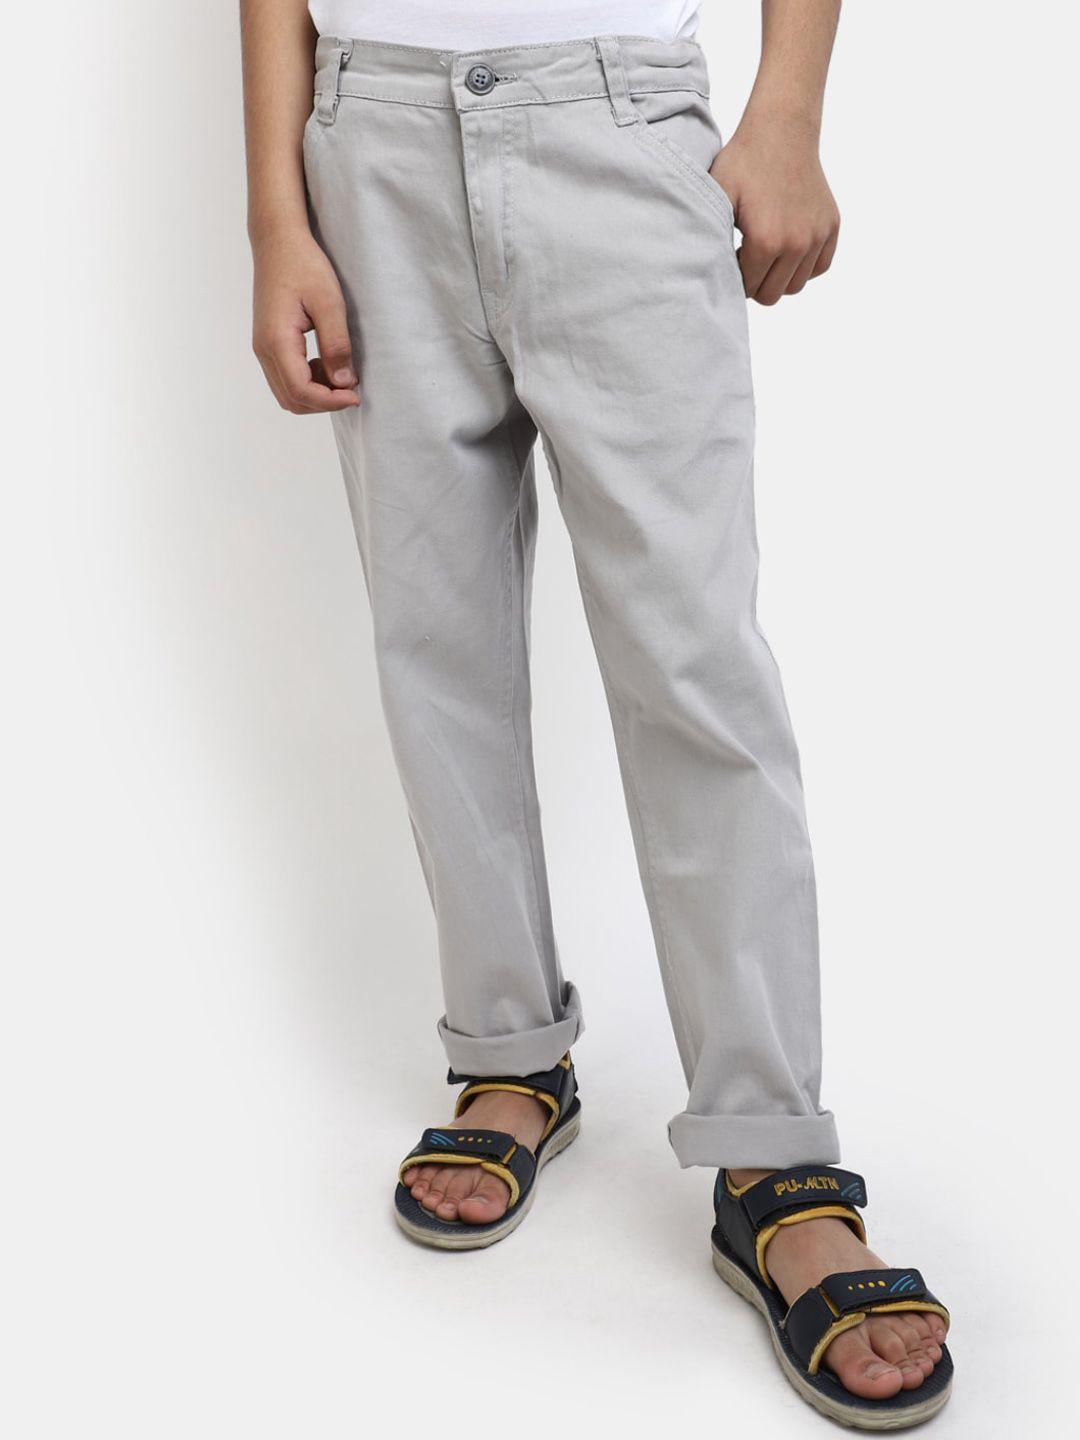 v-mart-boys-mid-rise-cotton-chinos-trousers